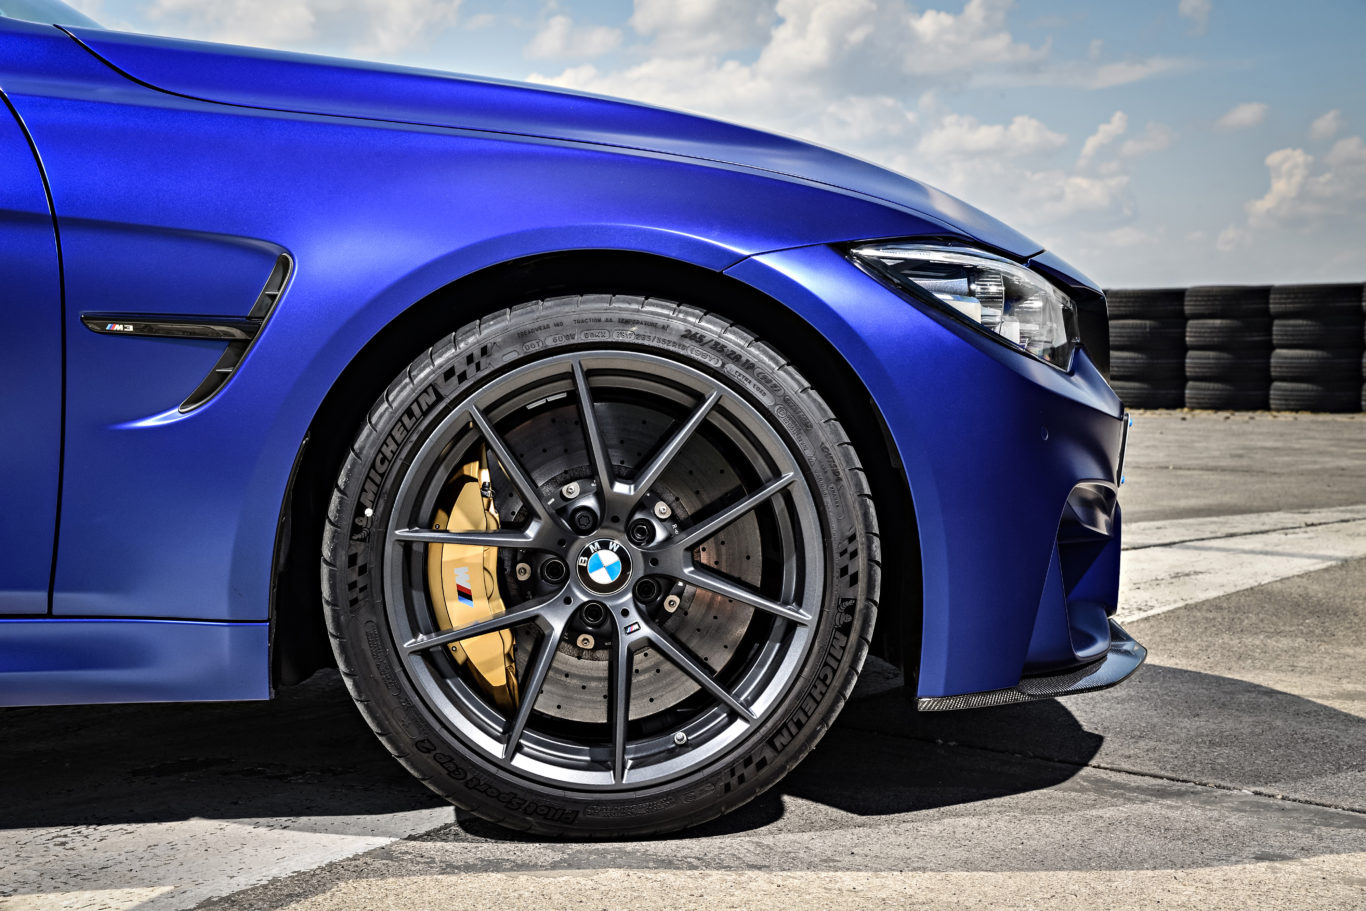 The M3 CS features gold brake calipers